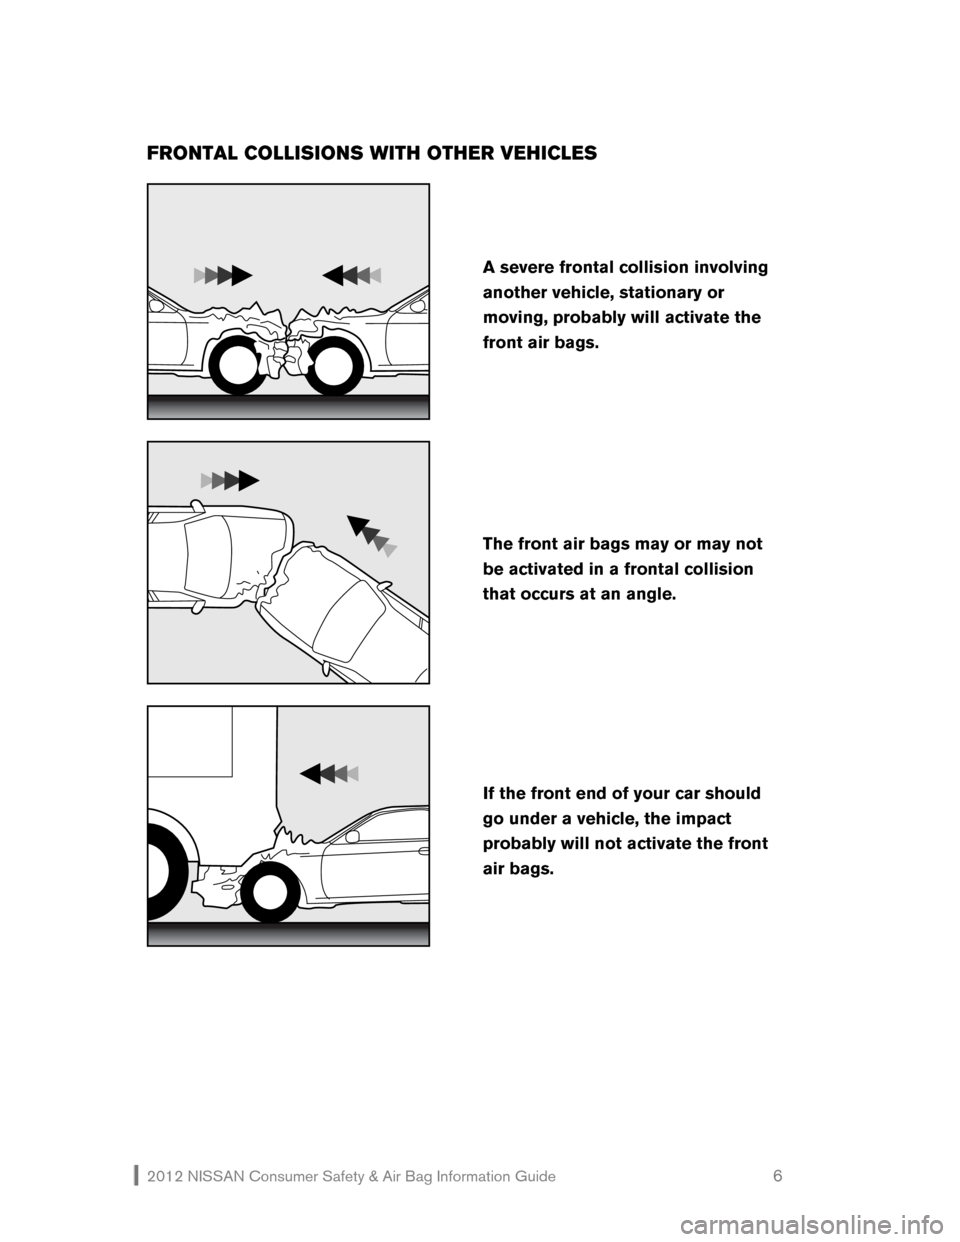 NISSAN XTERRA 2012 N50 / 2.G Consumer Safety Air Bag Information Guide 2012 NISSAN Consumer Safety & Air Bag Information Guide                                                   6 
FRONTAL COLLISIONS WITH OTHER VEHICLES 
 
 
 
 
If the front end of your car should 
go und